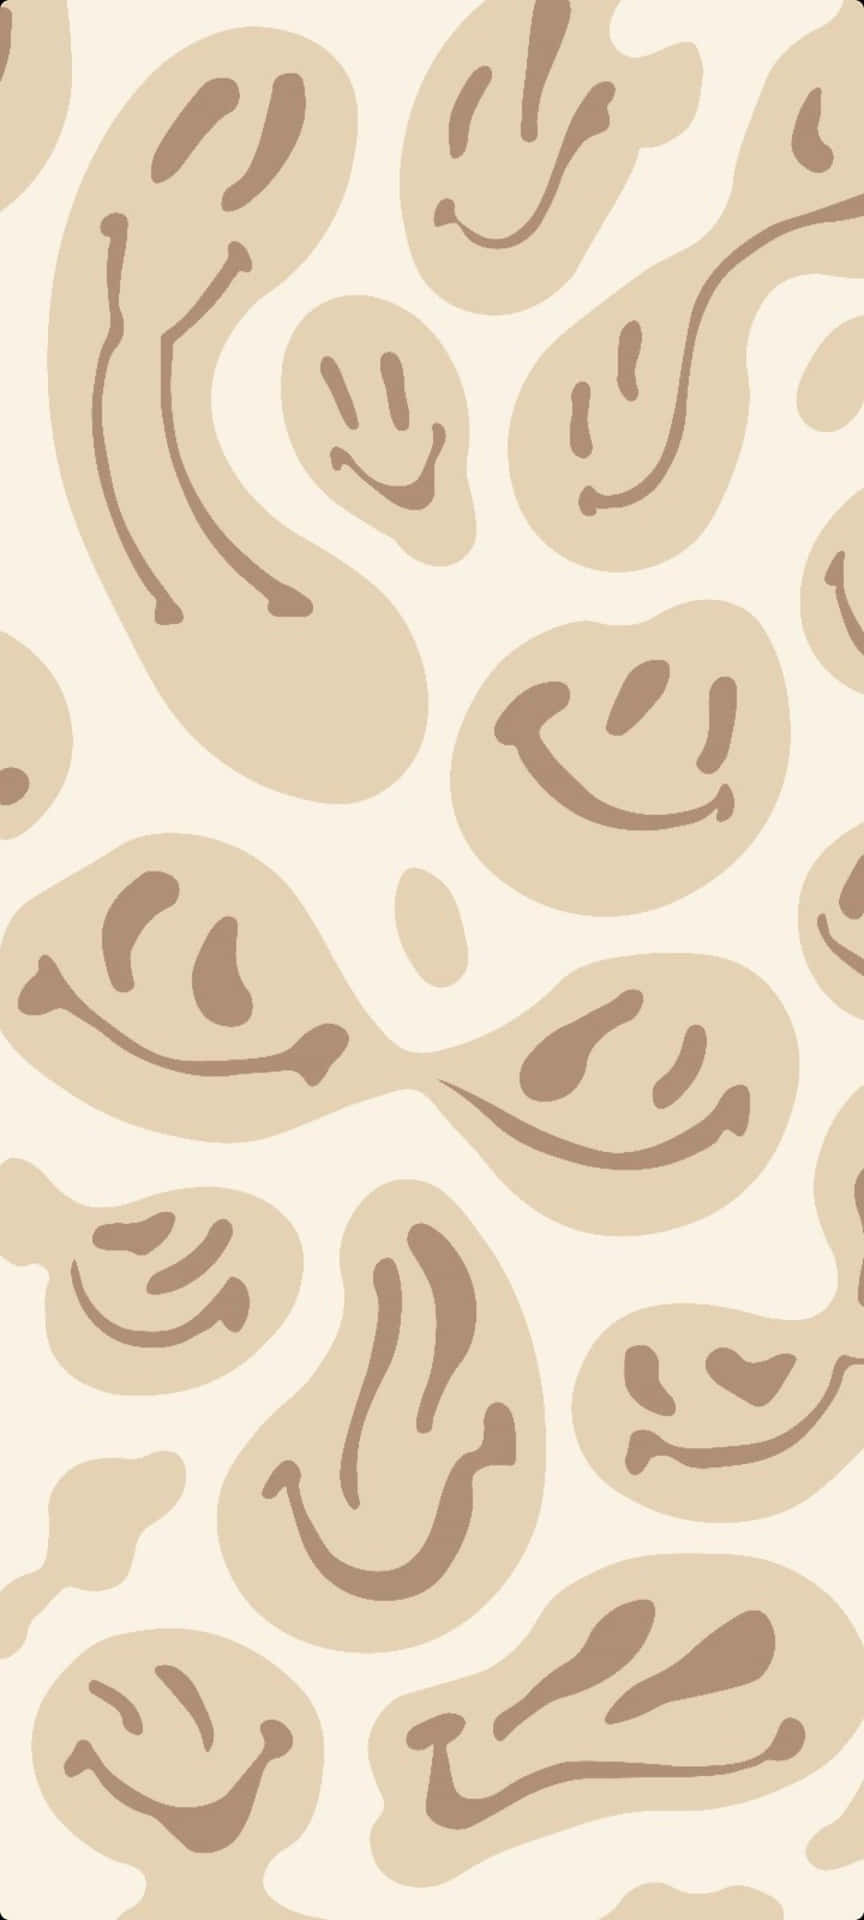 Abstract_ Smiley_ Face_ Pattern.jpg Wallpaper